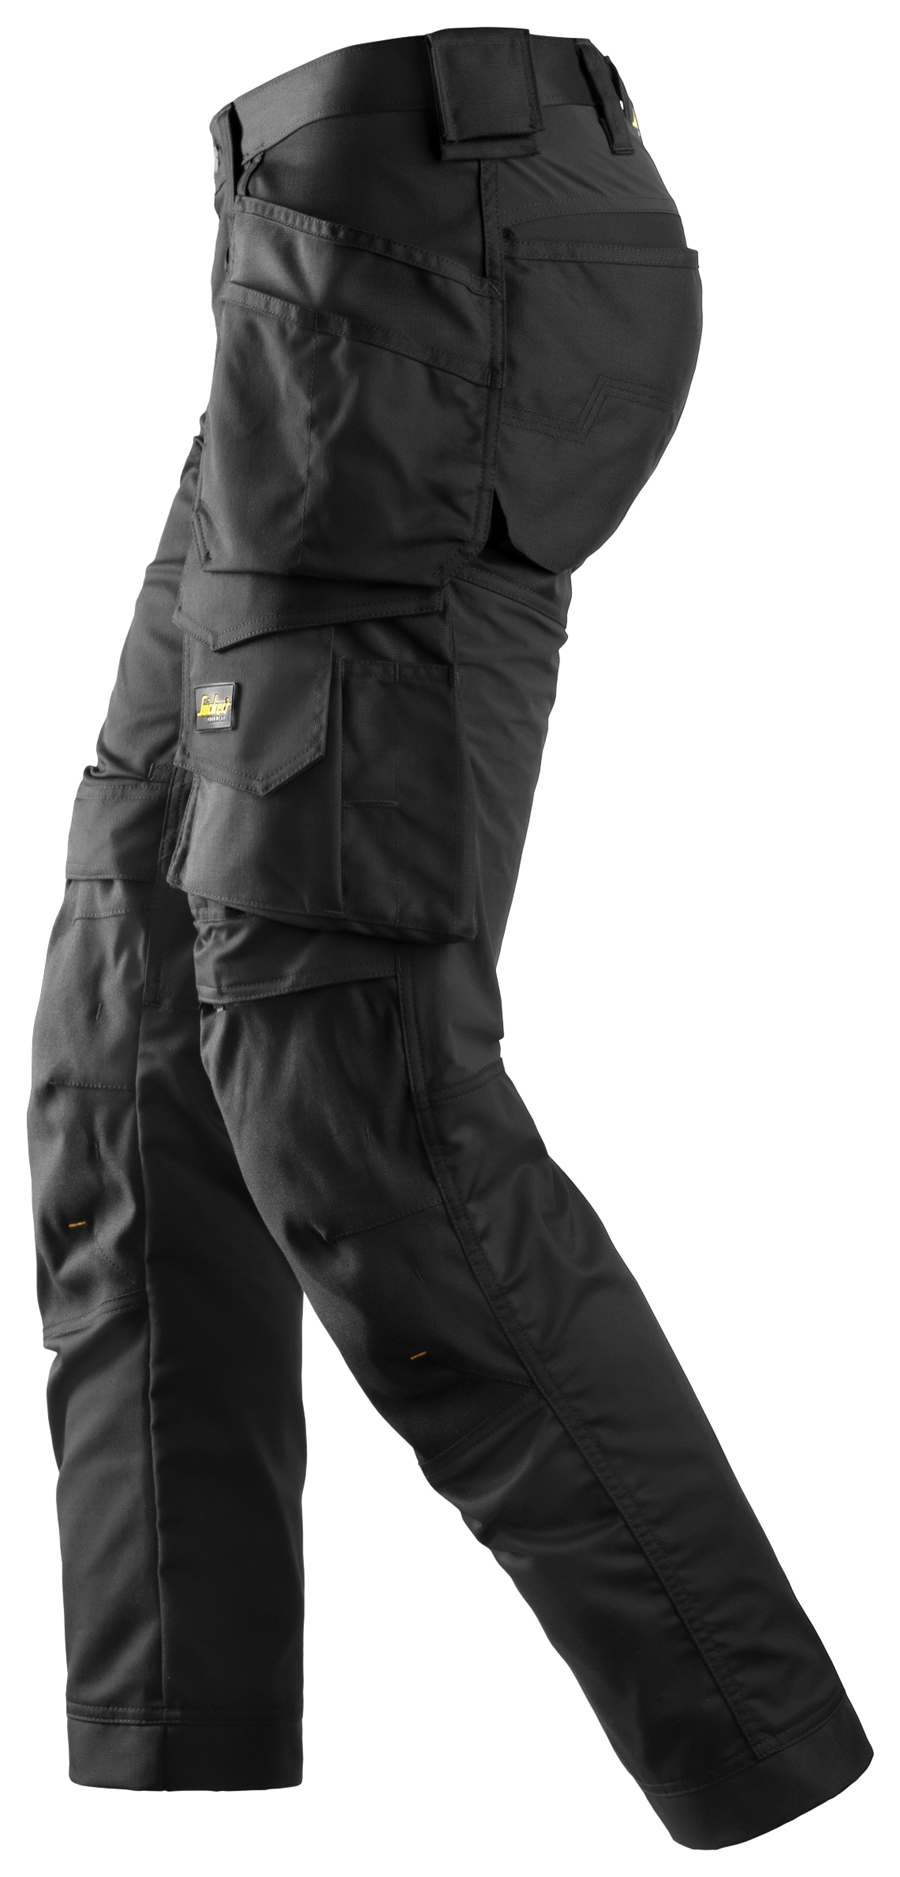 Snickers Ruffwork Canvas Work Trousers with Holster Pockets Steel Grey |  Tradeworx Online